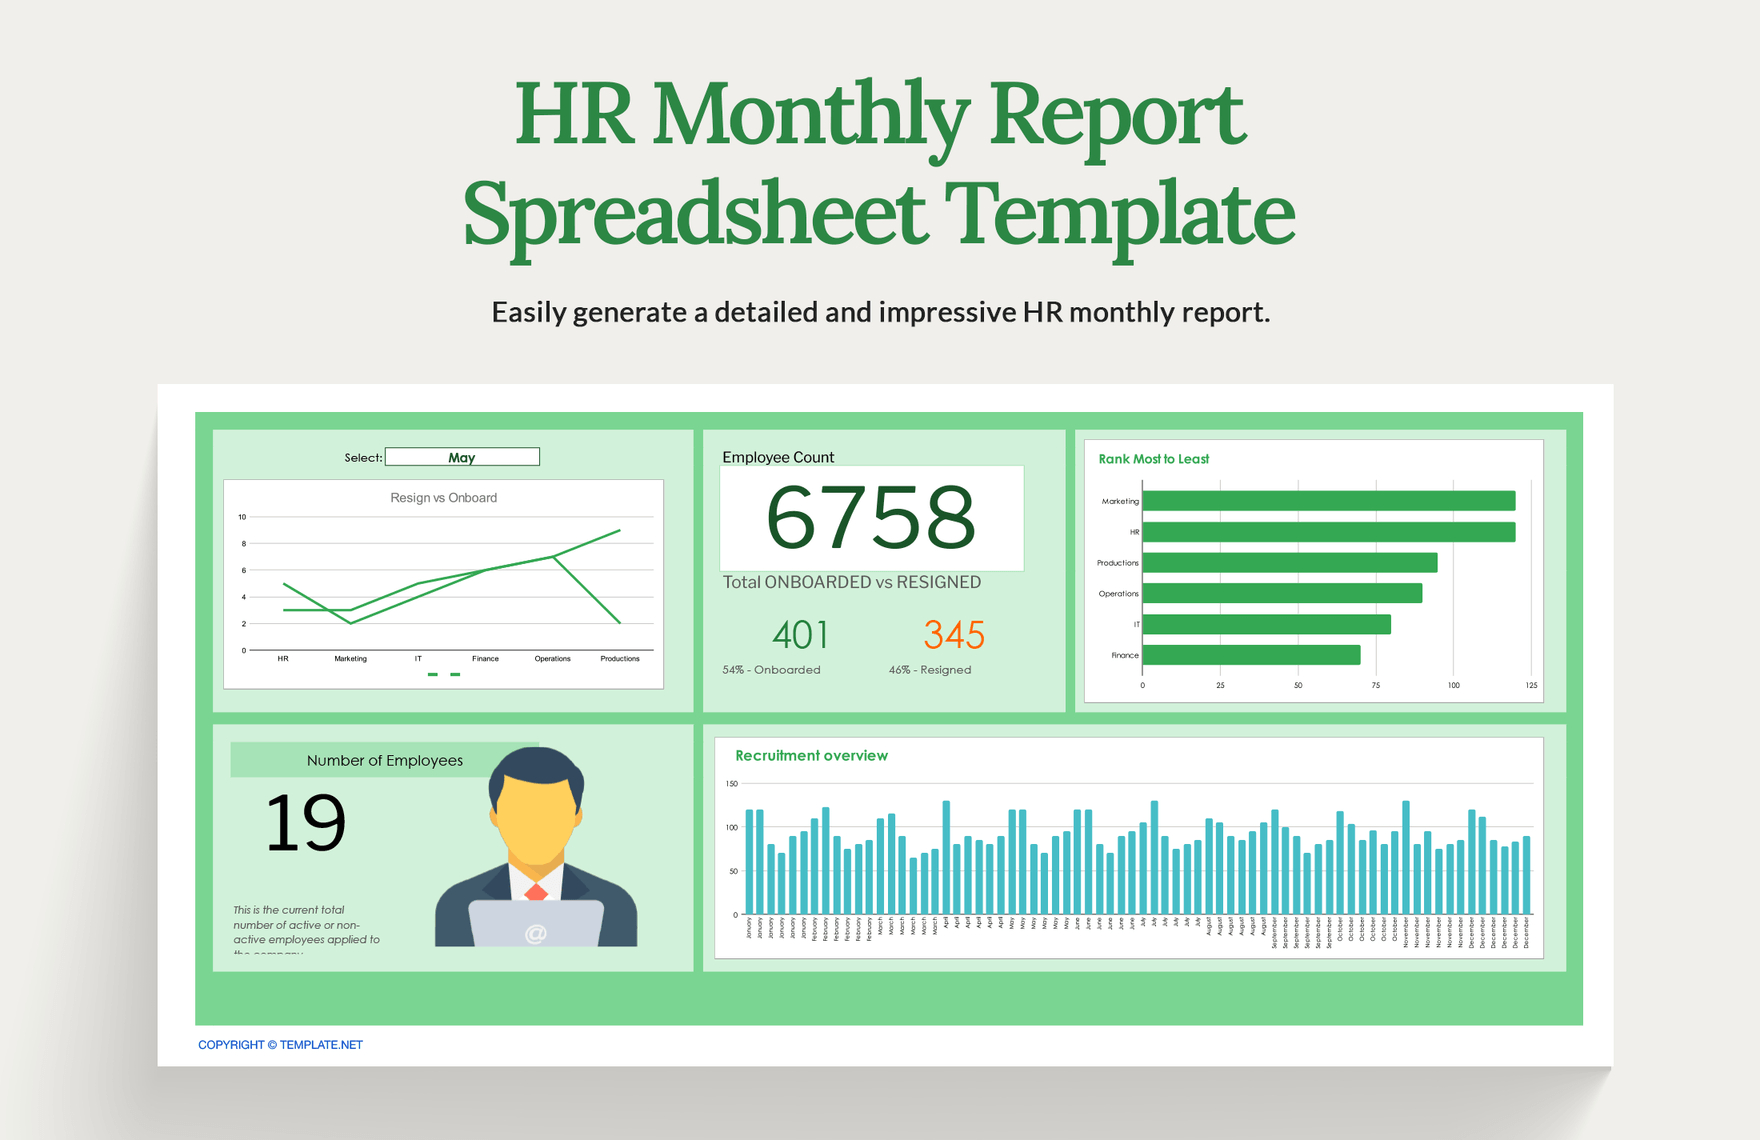 HR Monthly Report Spreadsheet Template in Excel, Google Sheets